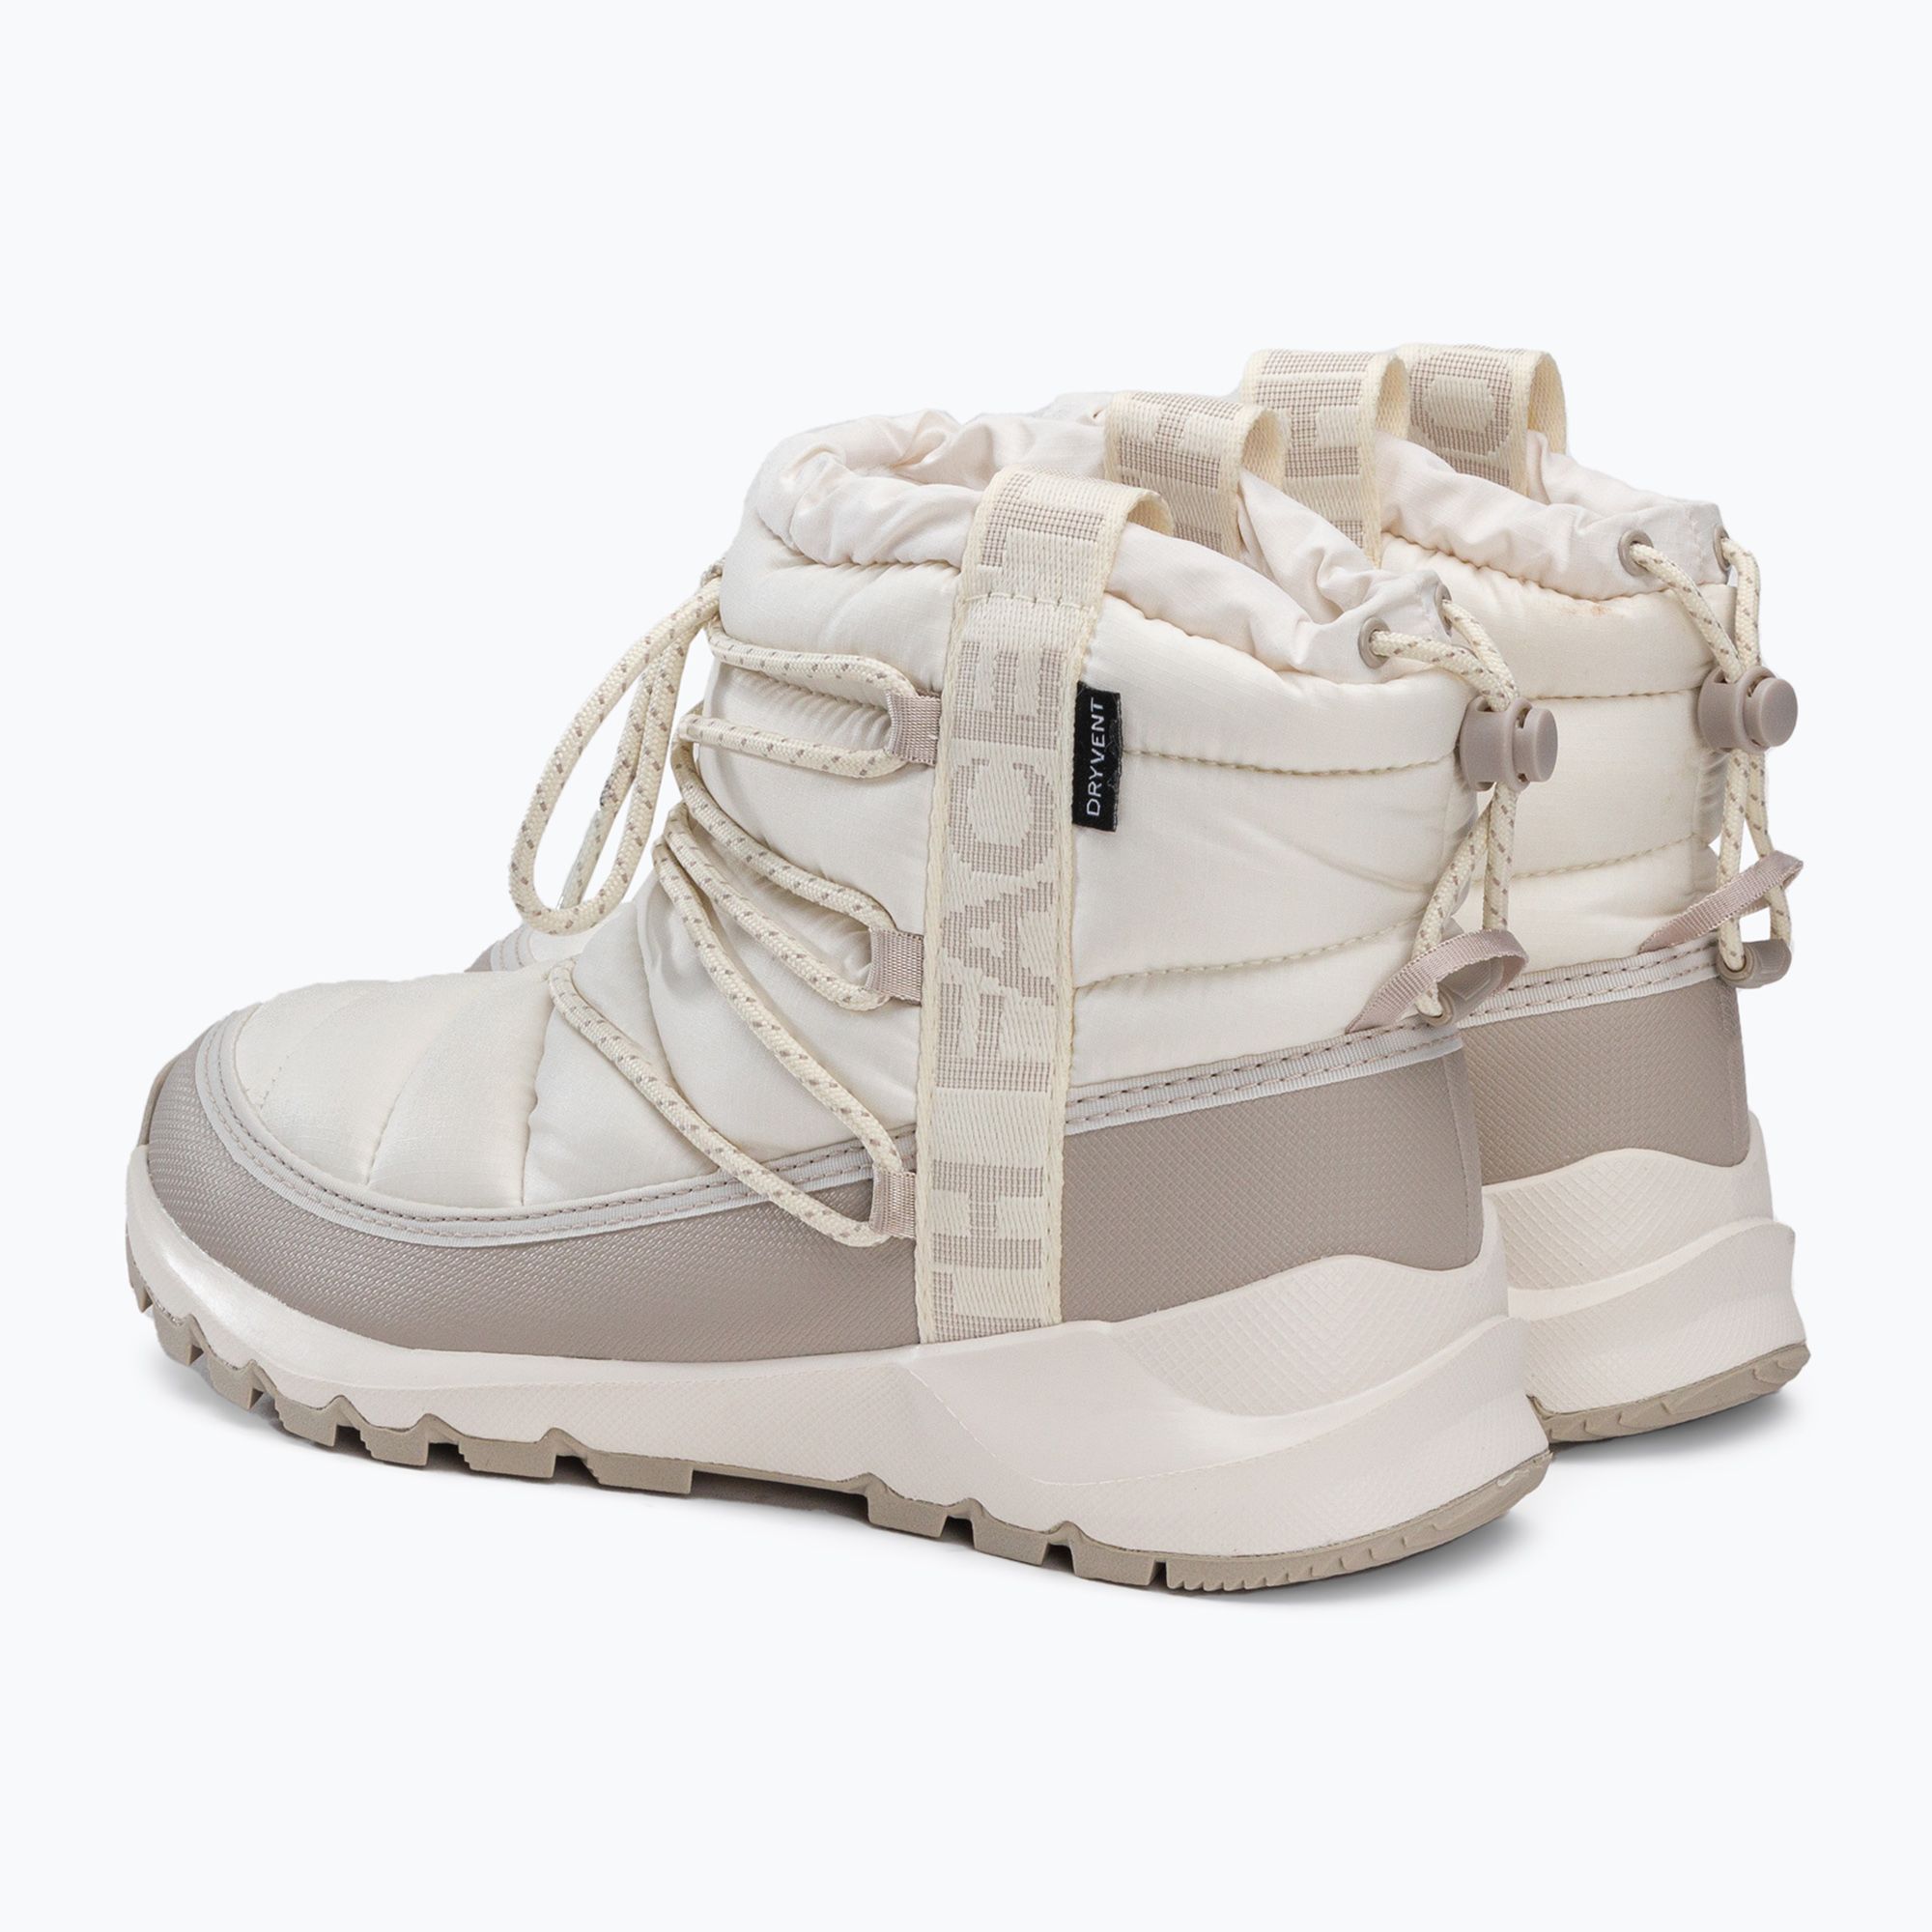 Buty trekkingowe damskie The North Face Thermoball Lace Up białe NF0A5LWD32F1 zdjęcie nr 3